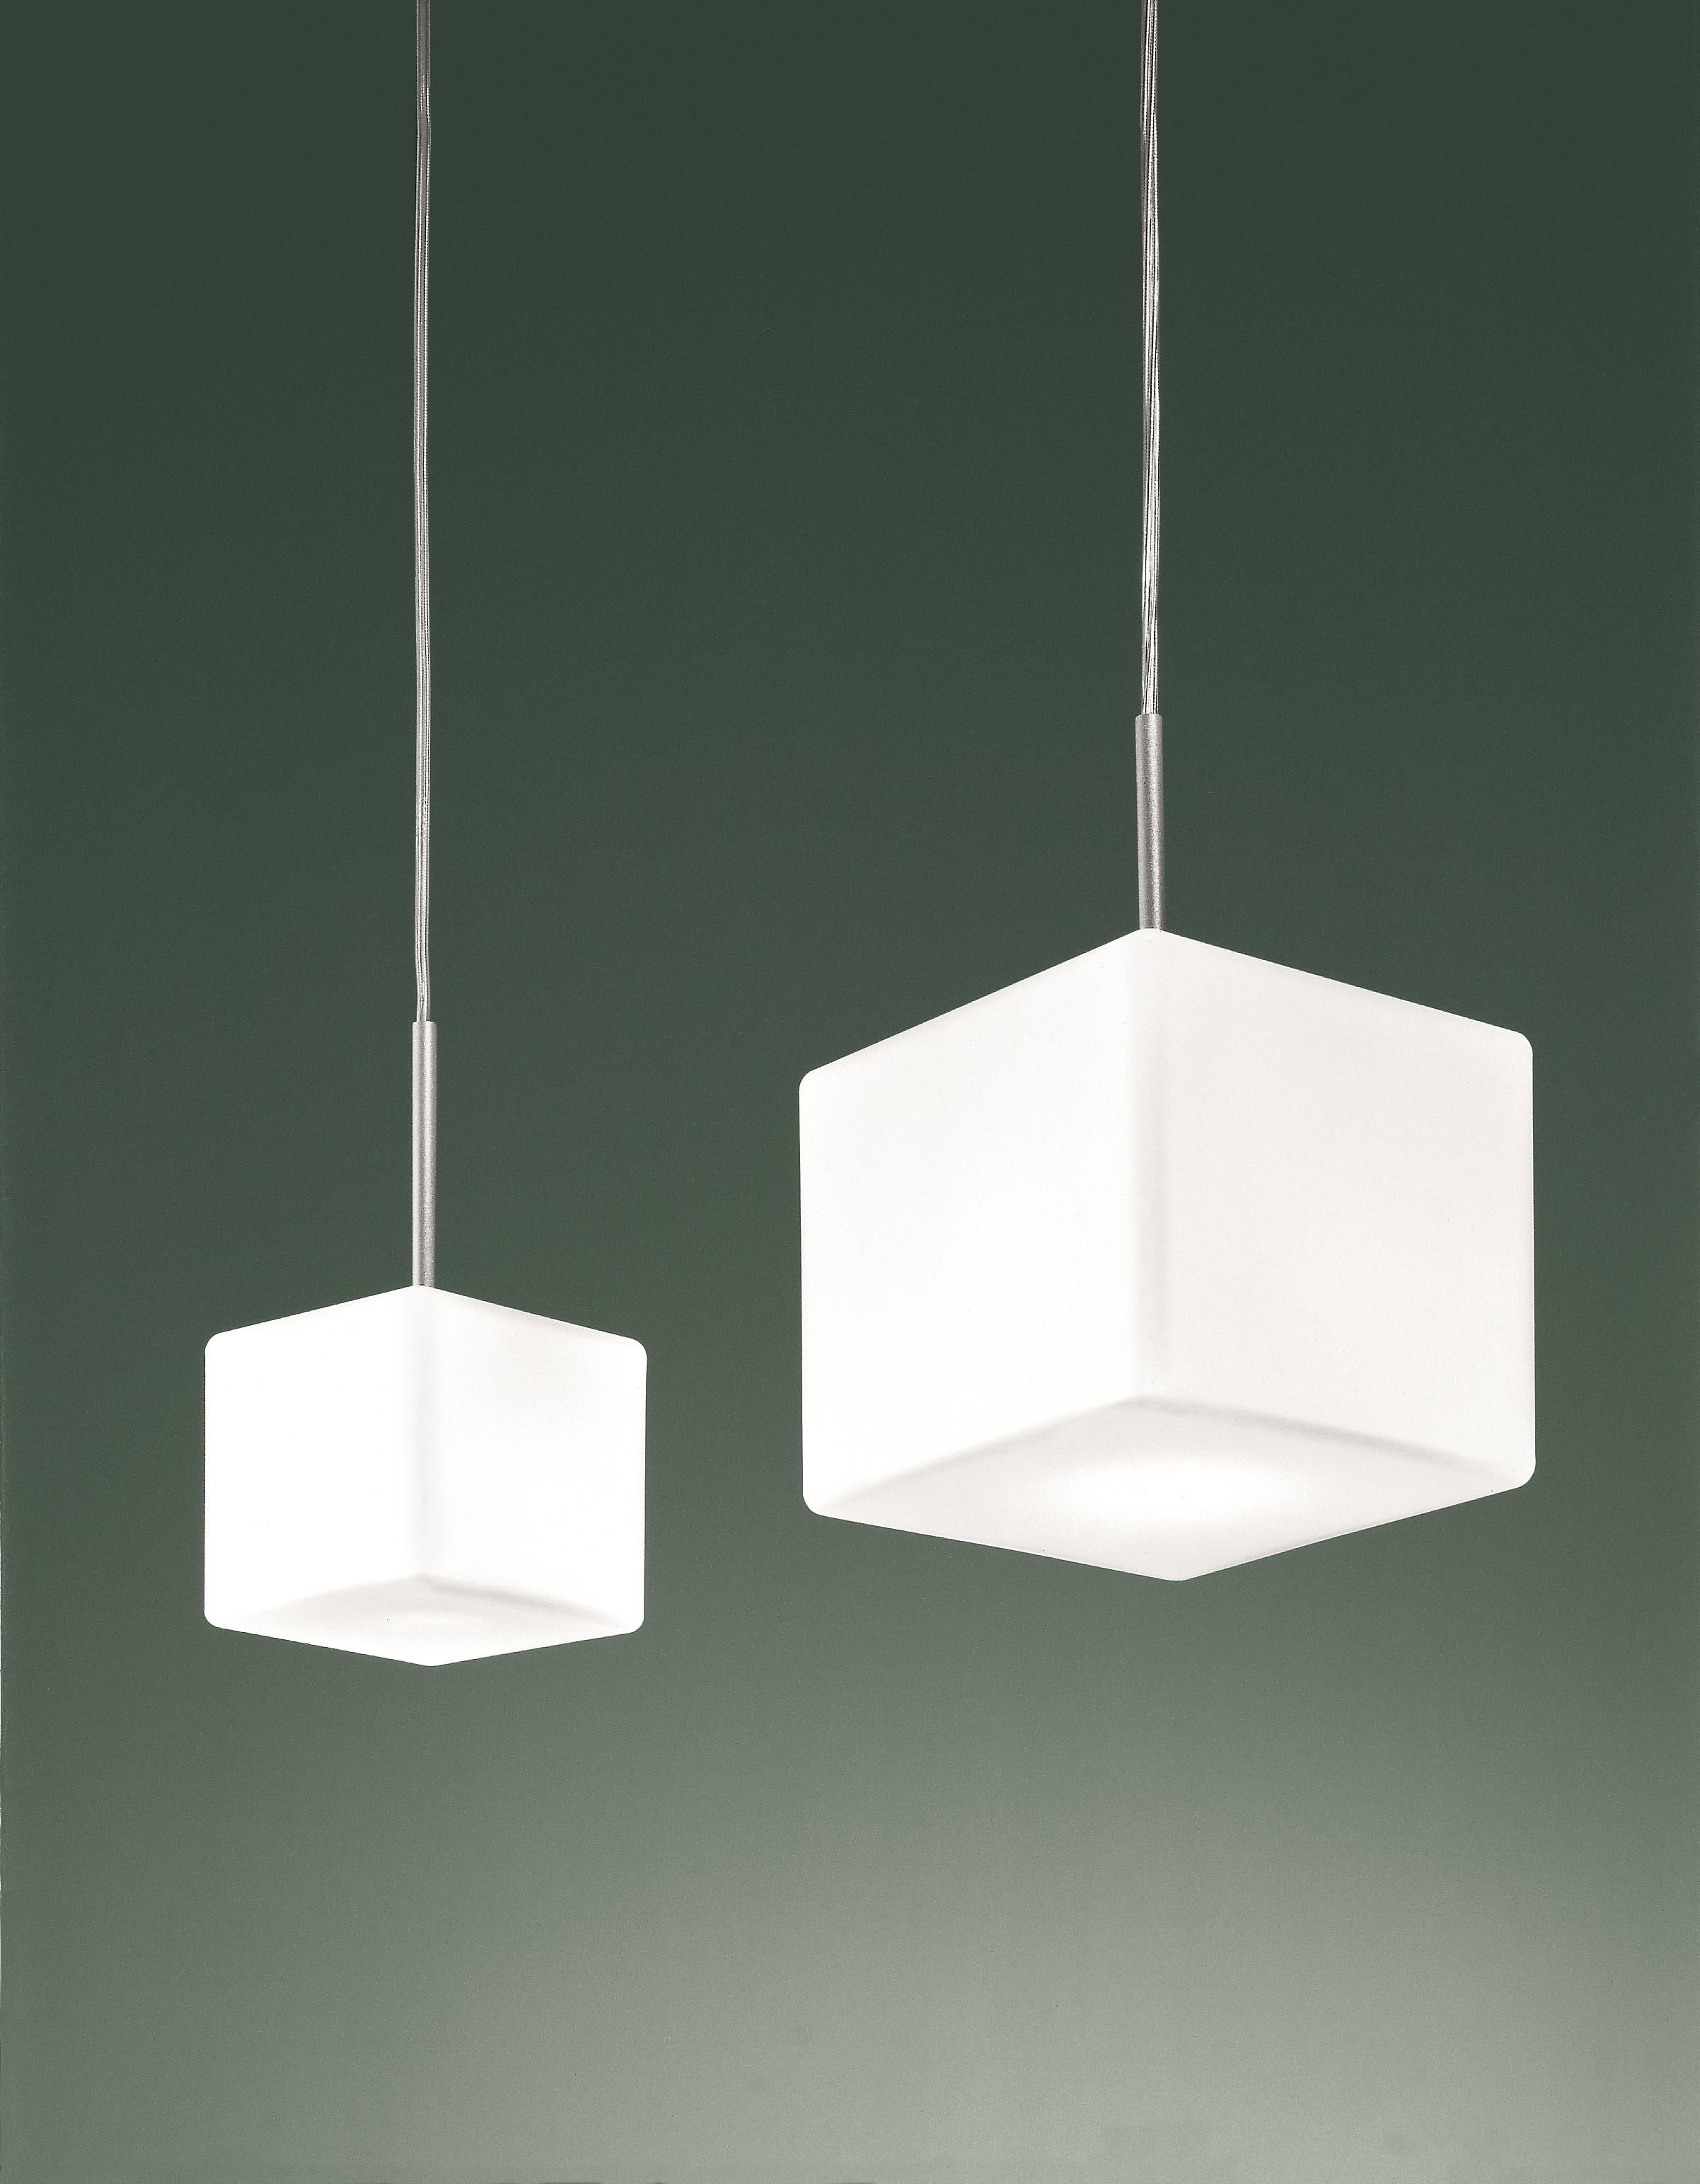 Italian Leucos Cubi S 16 Pendant Light in Satin White and Gray by Design Lab For Sale